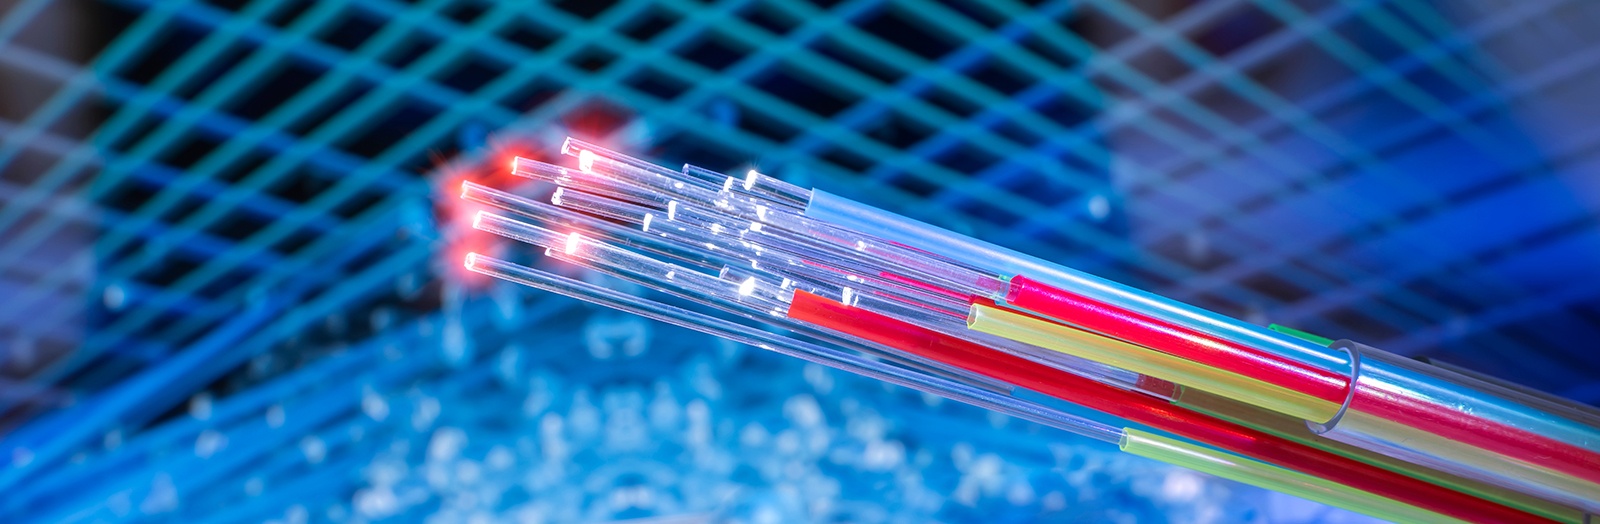 Fully Tested Fiber Optic Solutions by Trained Technicians at Adept Communications, Inc.